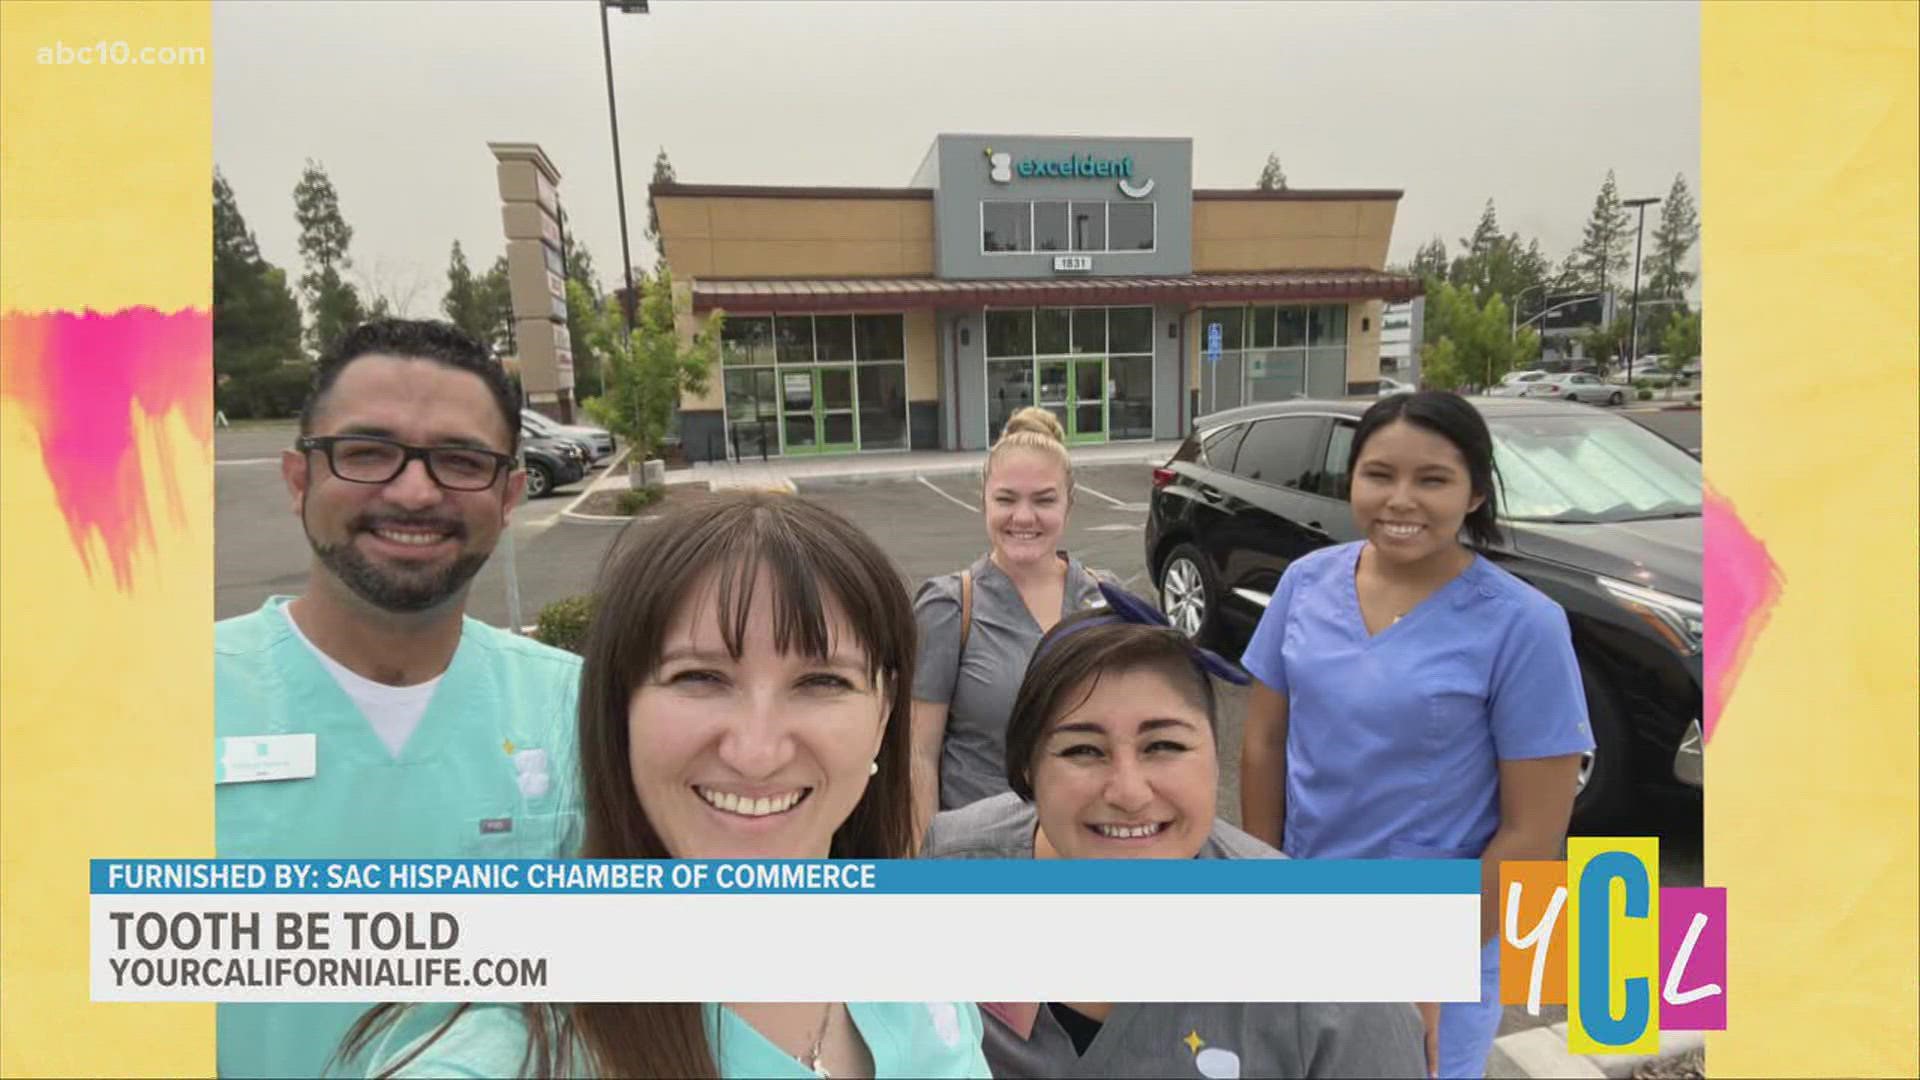 We fill in the gaps by putting a spotlight on a local dental practice that's cultivating a culture of smiles in the community with their "exceldent" services!